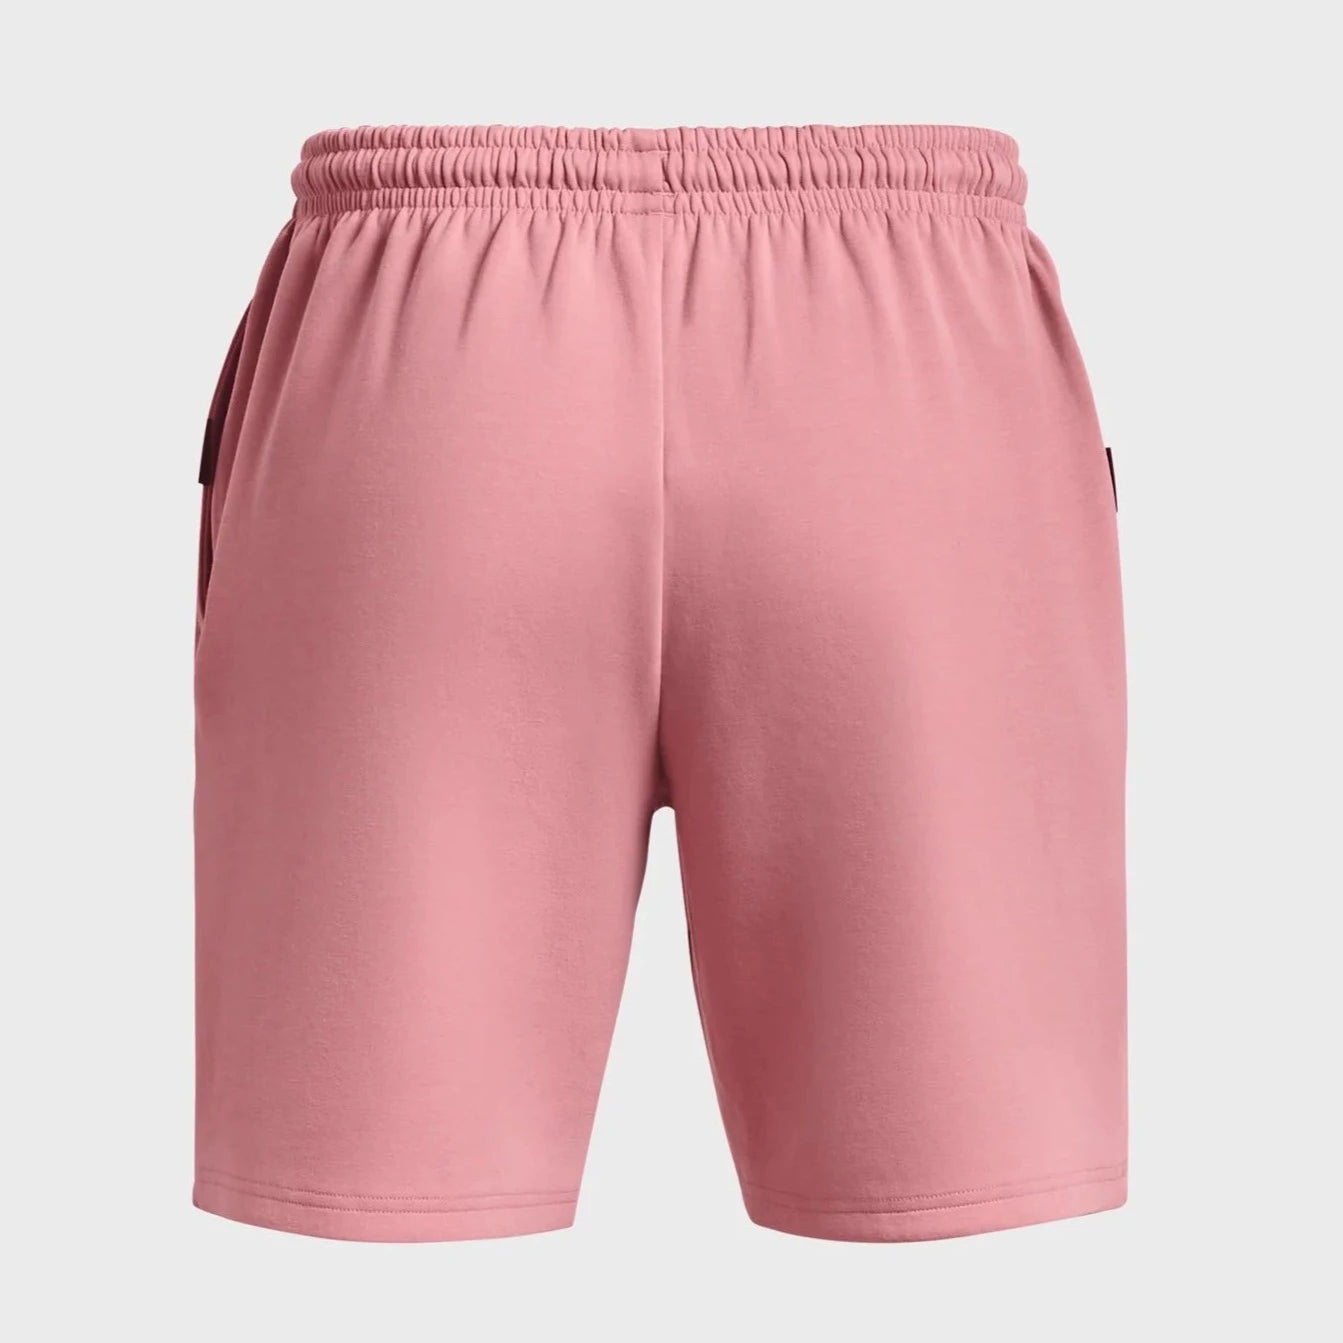 Under Armour Summit Knit Shorts - Pantaloncini in maglia Uomo - Neverland Firenze